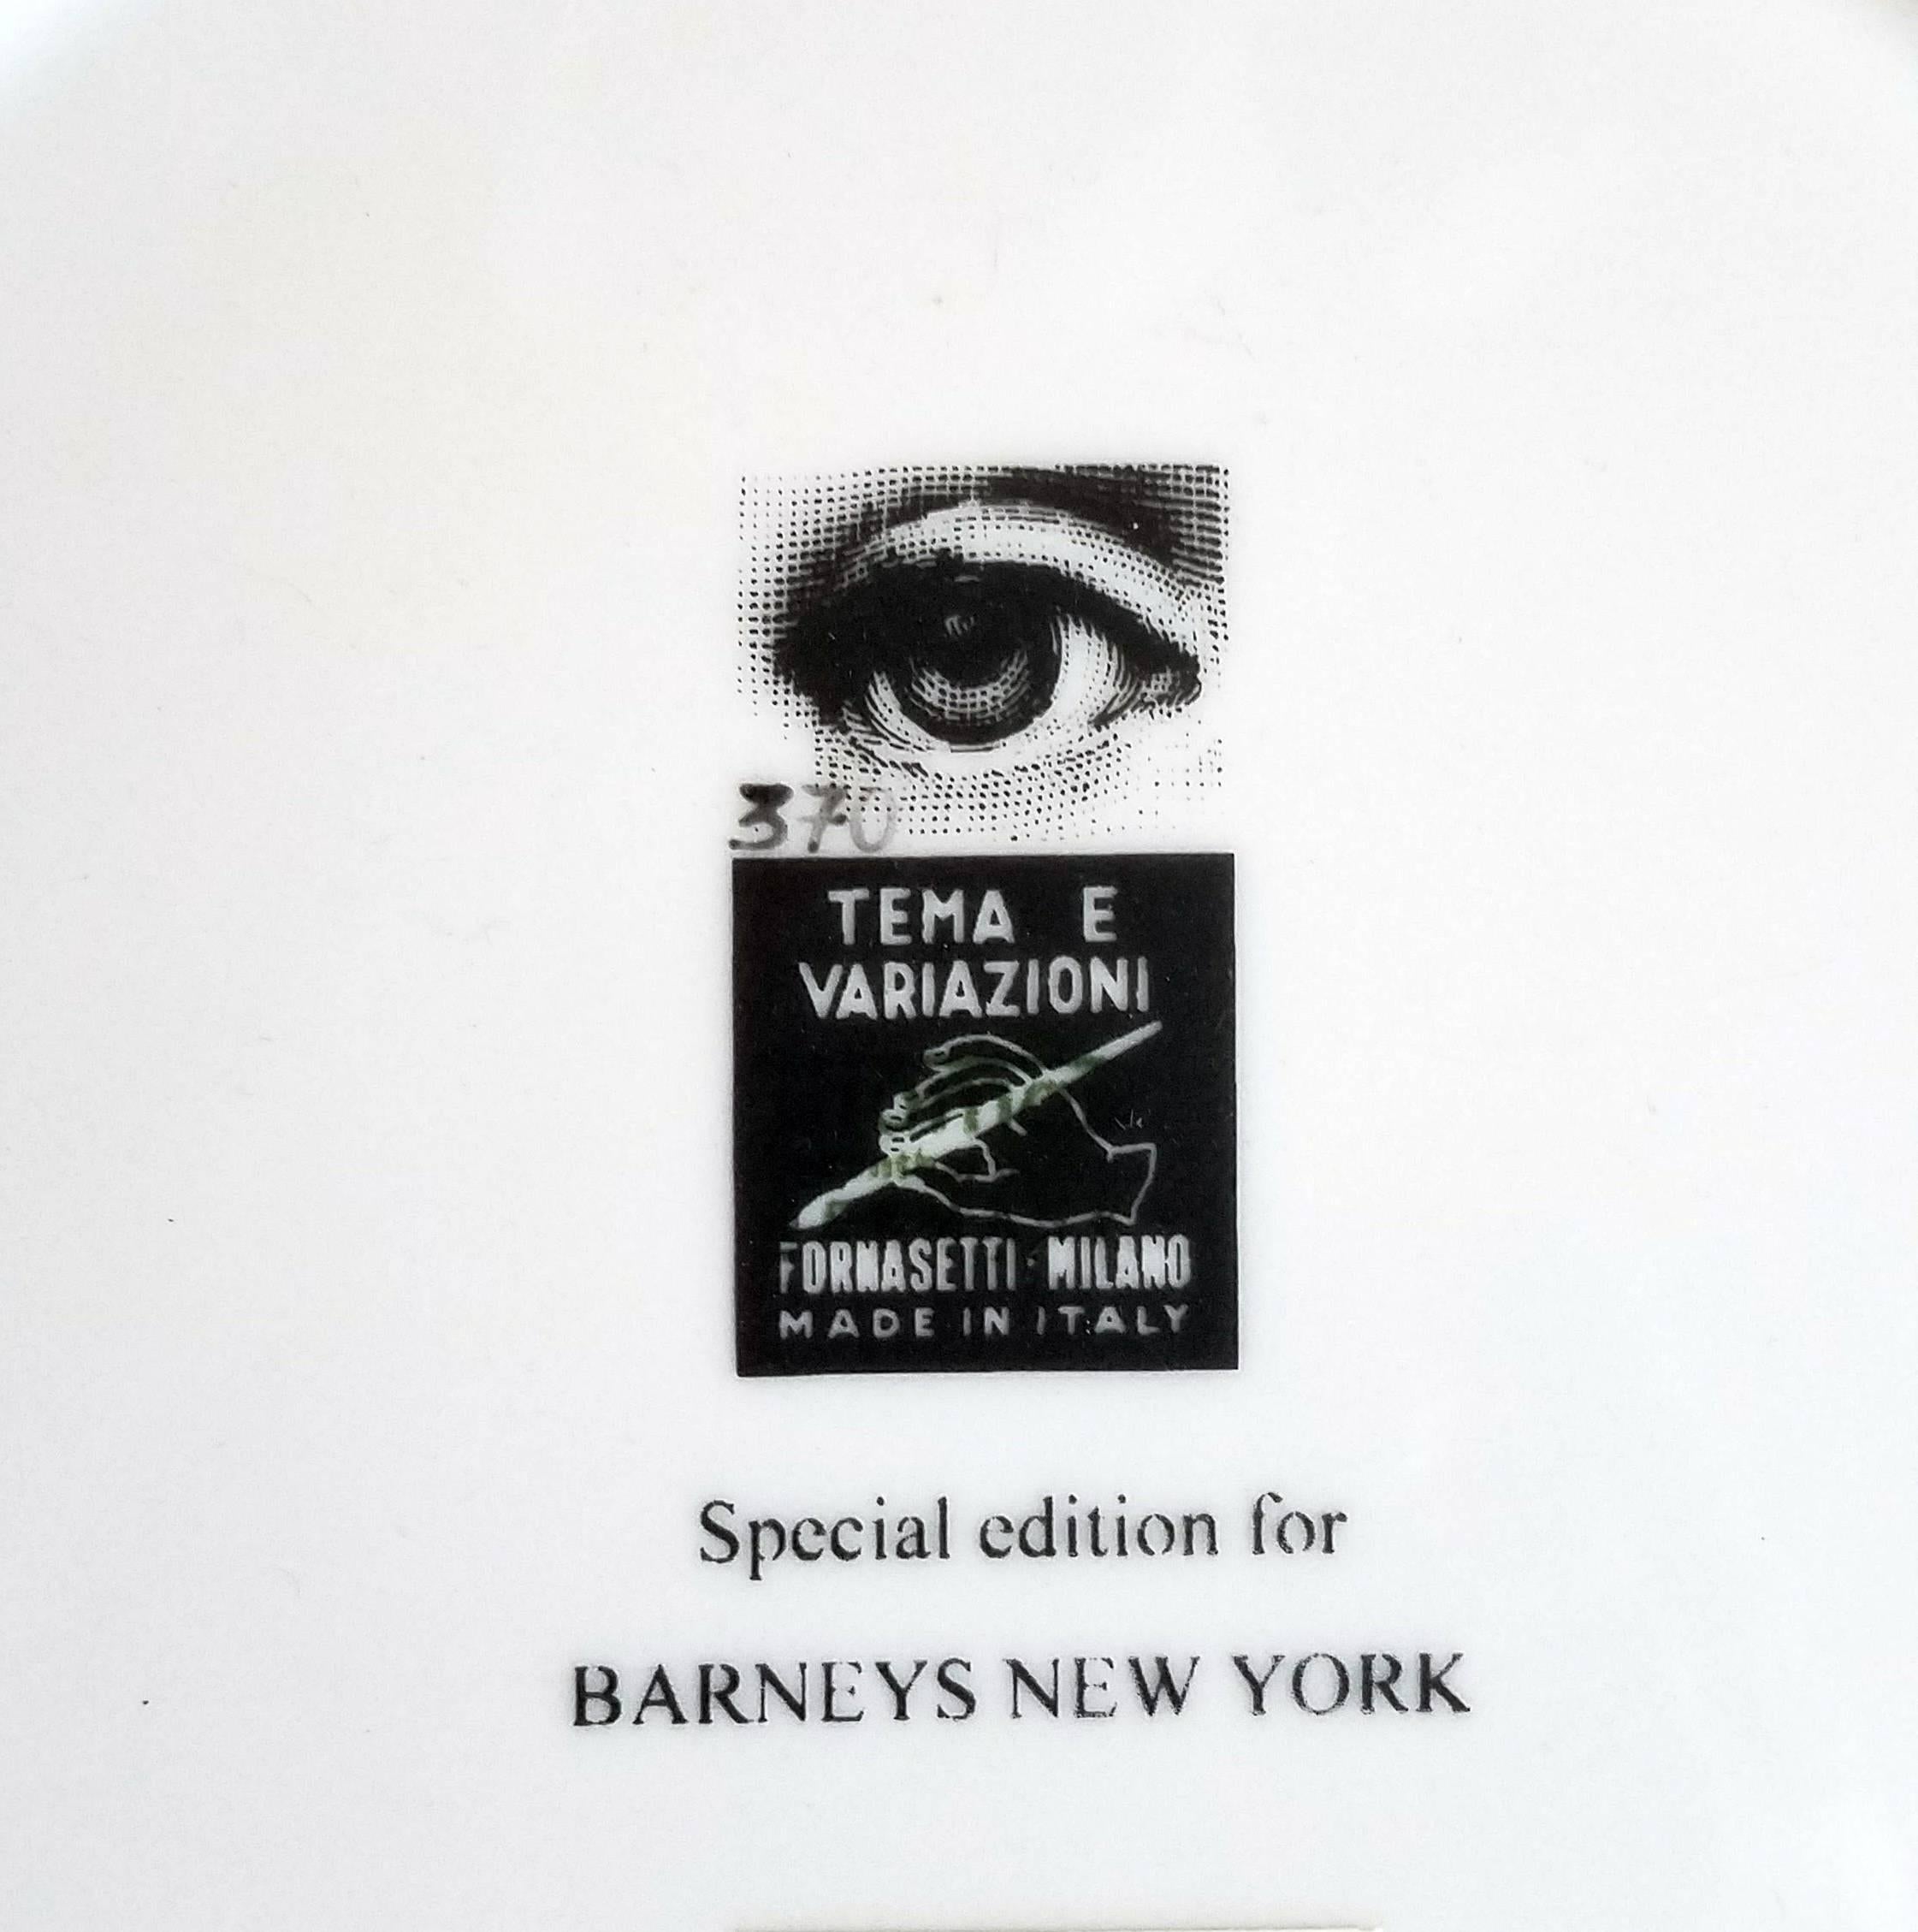 Fornasetti Tema E Variazioni plate, 
theme and variation number 370. 
The iconic image of Lina Cavalieri. 
Barnaba Fornasetti.
Special Edition for Barneys New York.

A variation of Fornasetti's Tema E Variazioni series based on the face of the